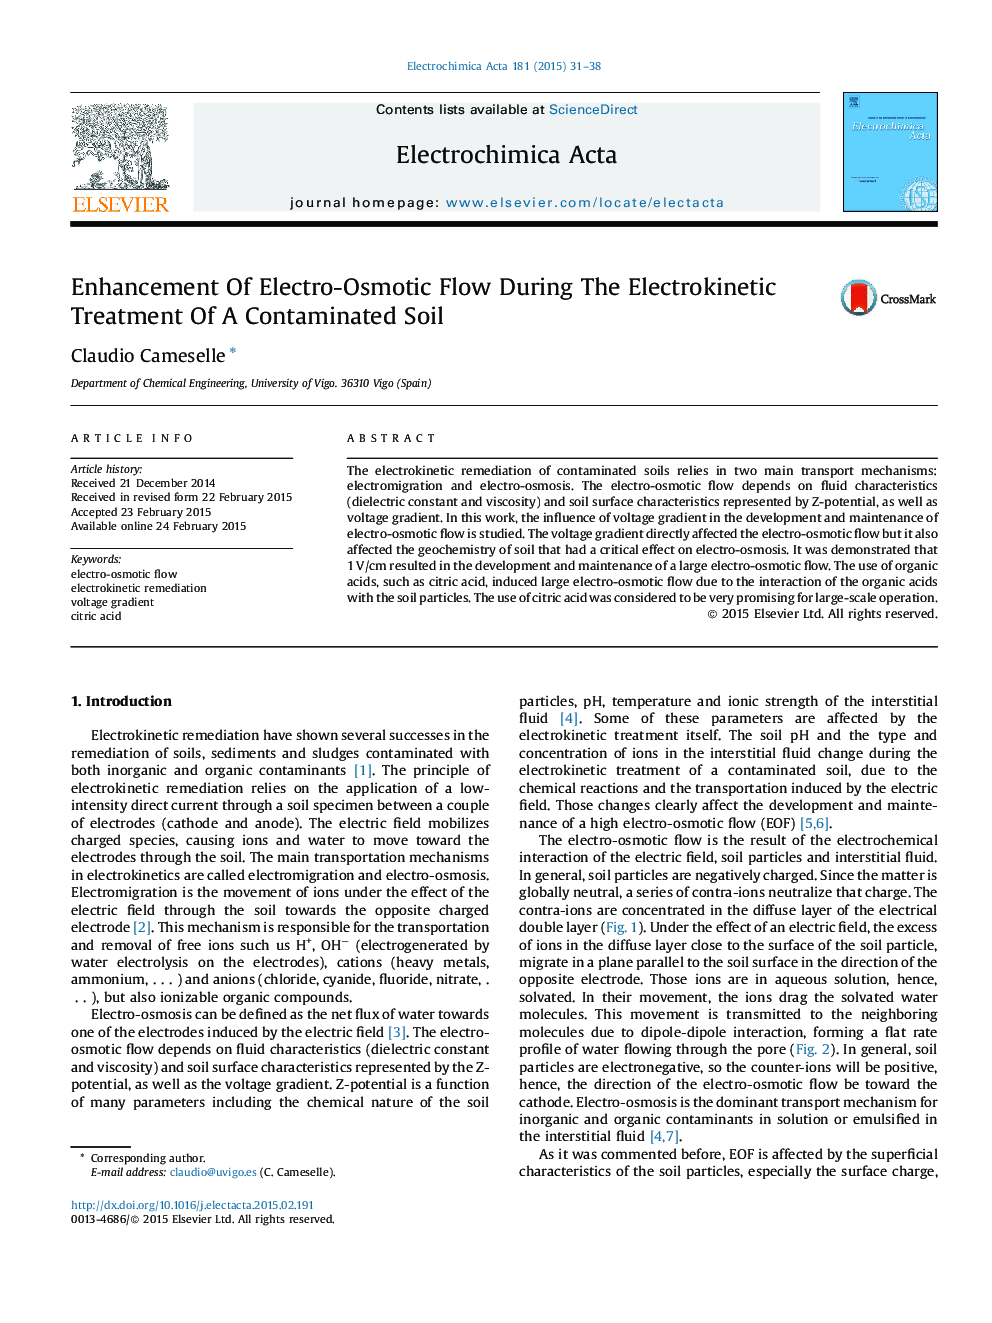 Enhancement Of Electro-Osmotic Flow During The Electrokinetic Treatment Of A Contaminated Soil